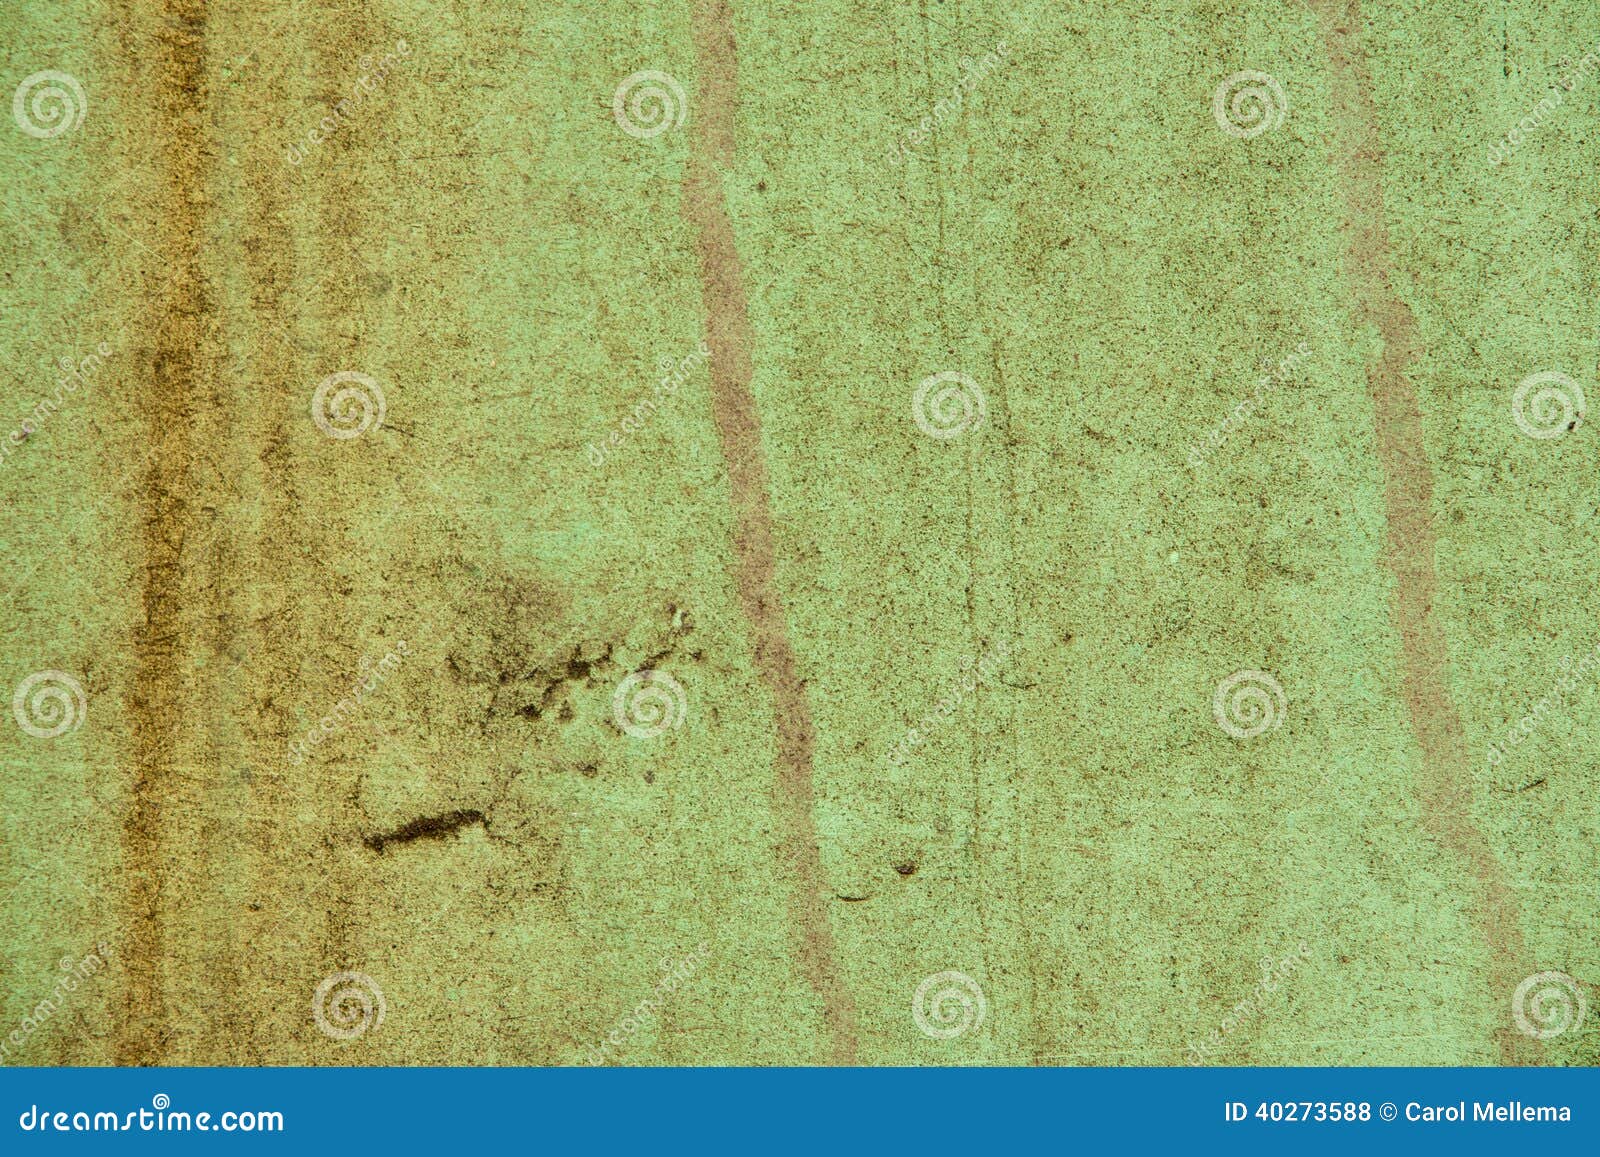 Green And Brown Background Texture Stock Photo - Image of paint